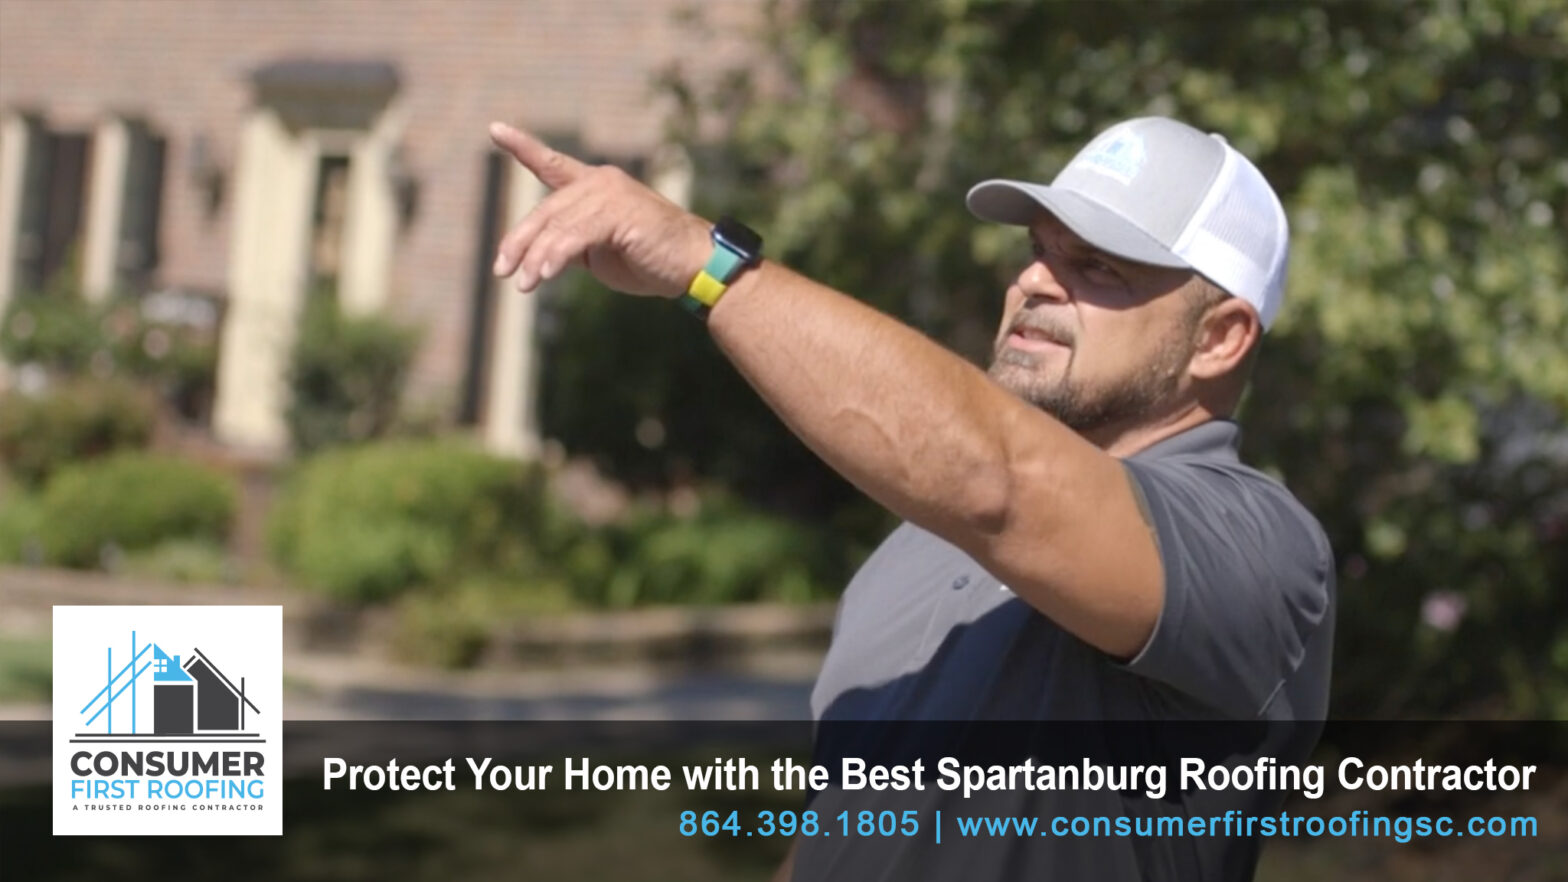 Spartanburg Roofing Contractor | Consumer First Roofing